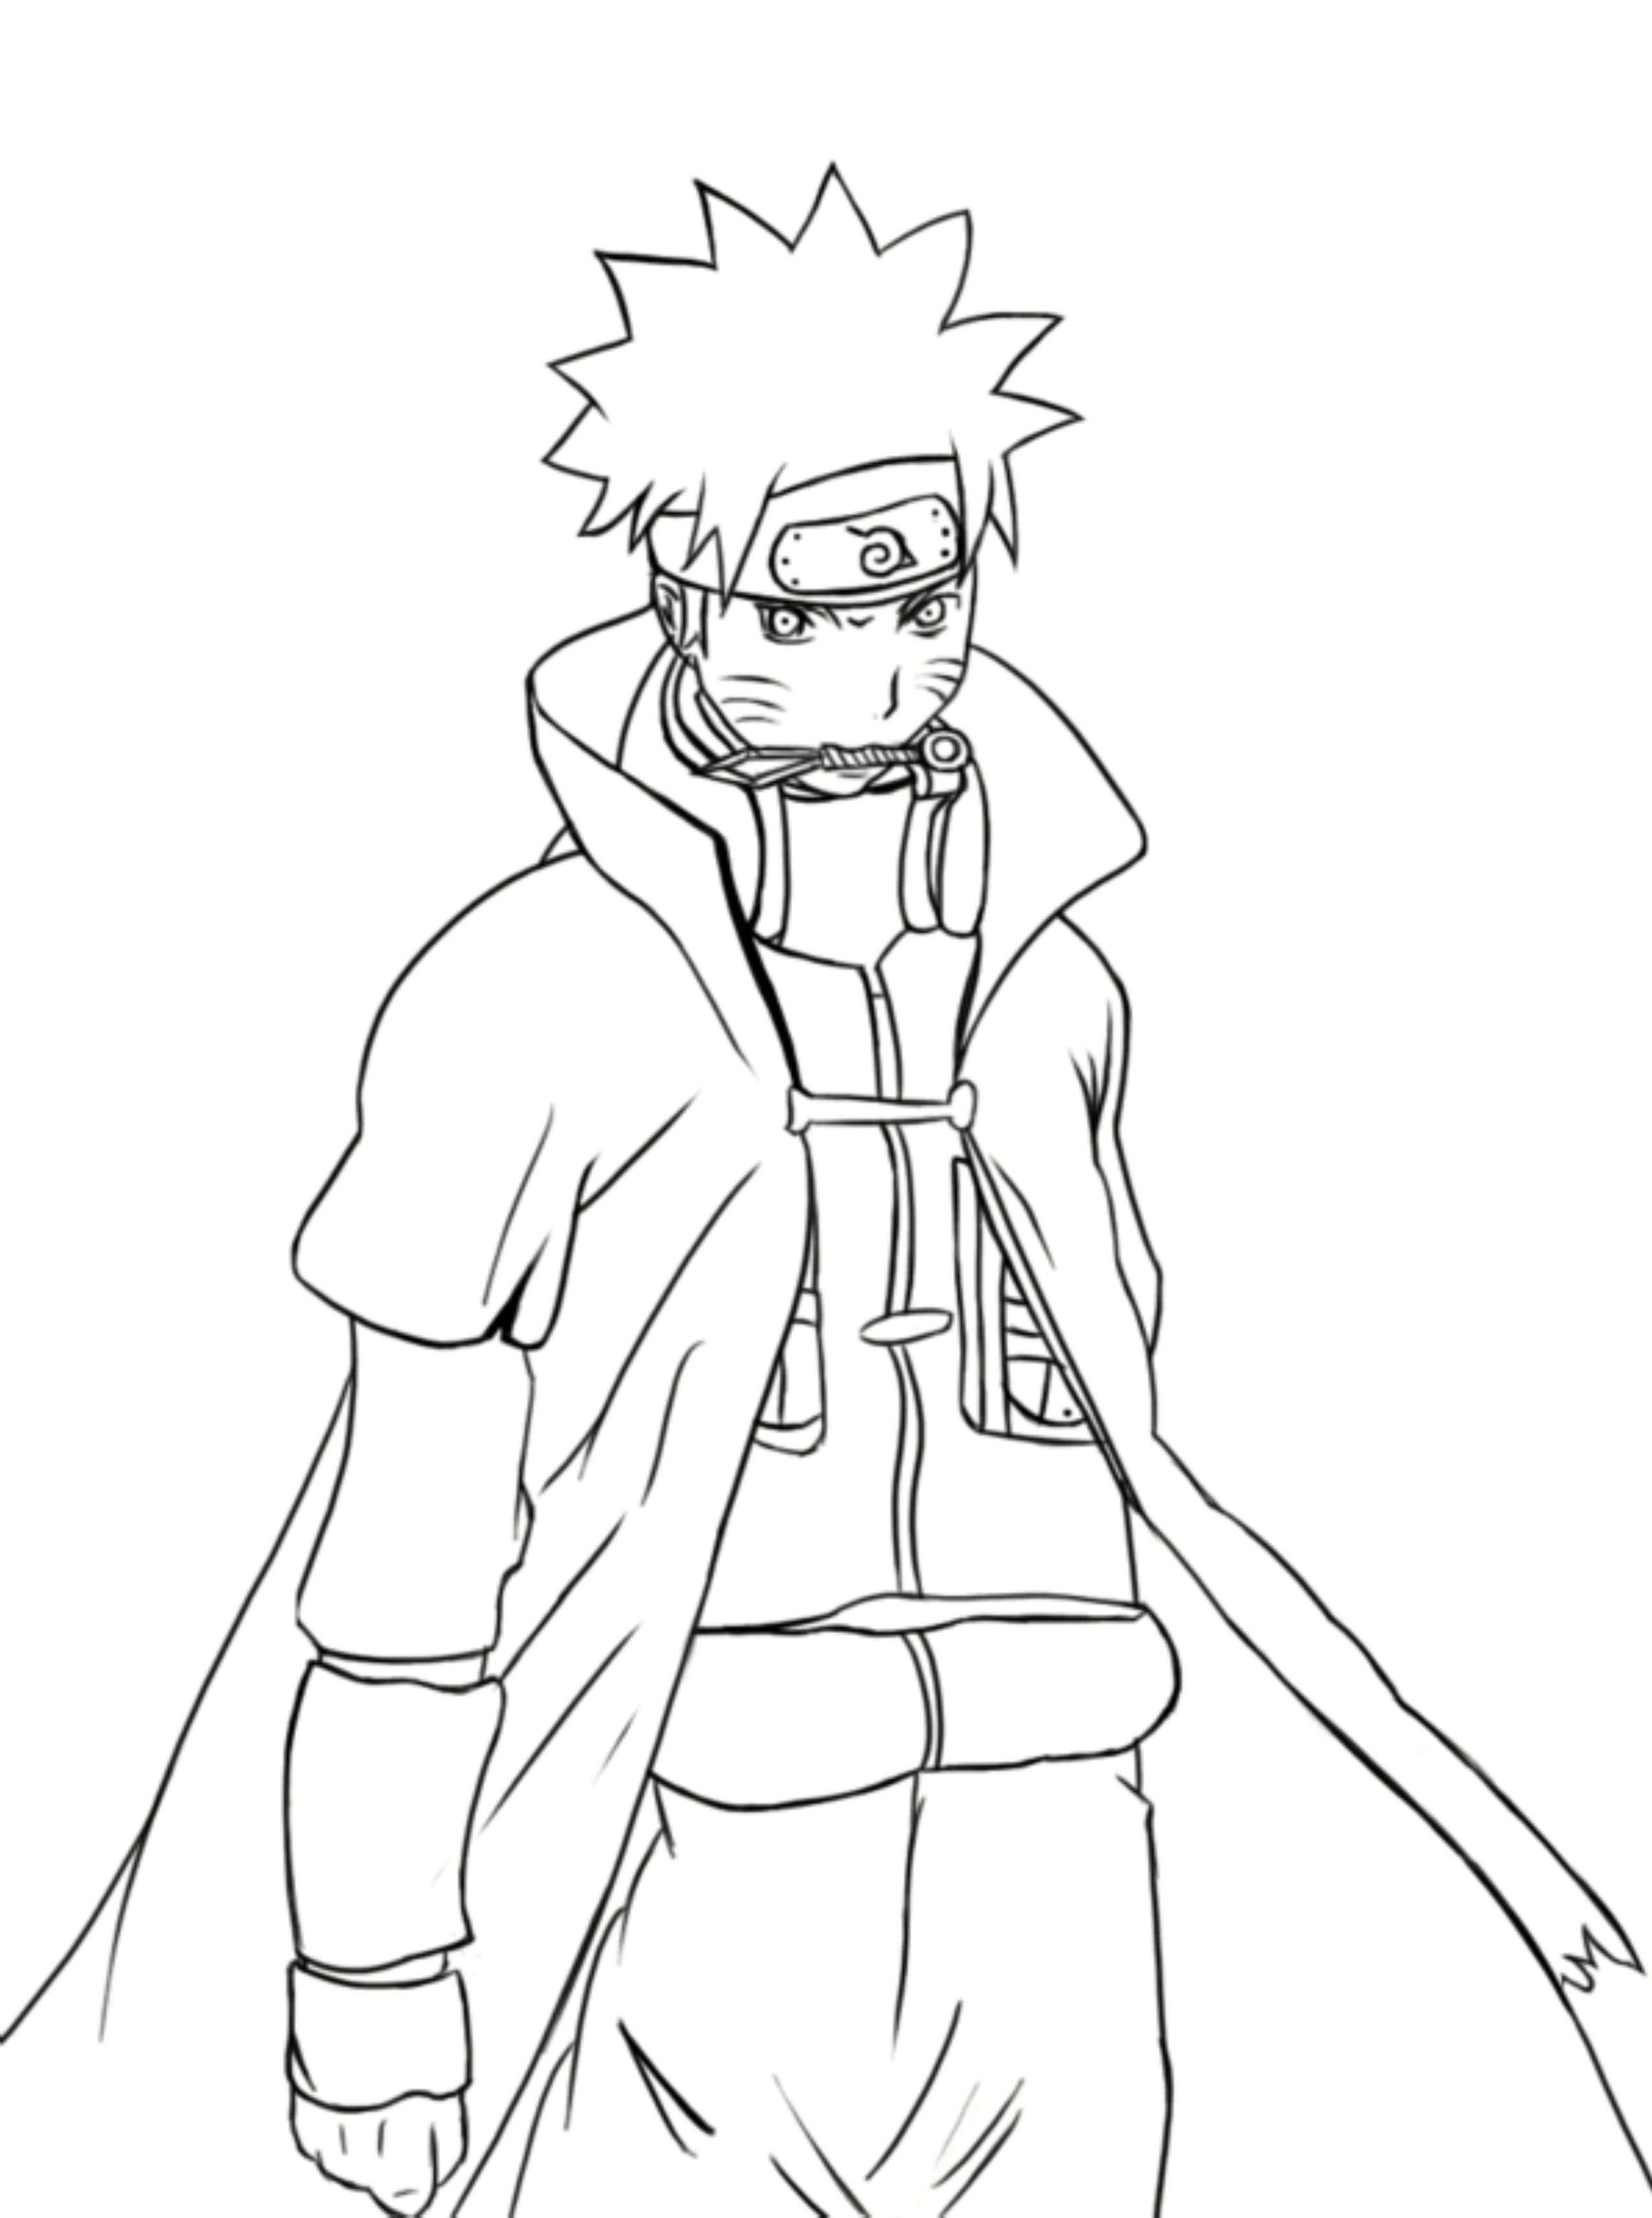 Naruto Sage Mode Coloring Pages at GetColorings.com Free printable coloring...